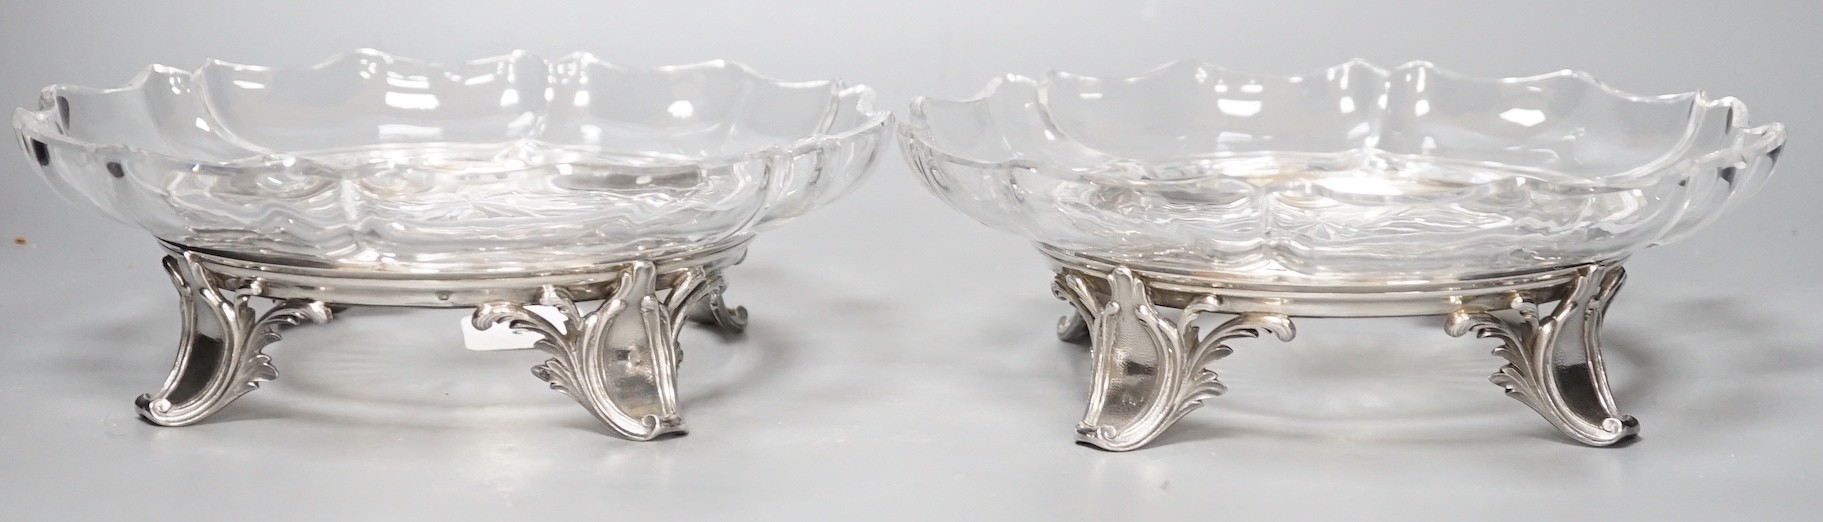 A pair of early 20th century French 950 standard white metal stands and glass dessert dishes, by Risler, dish diameter 16.8cm, metal weight 23oz.